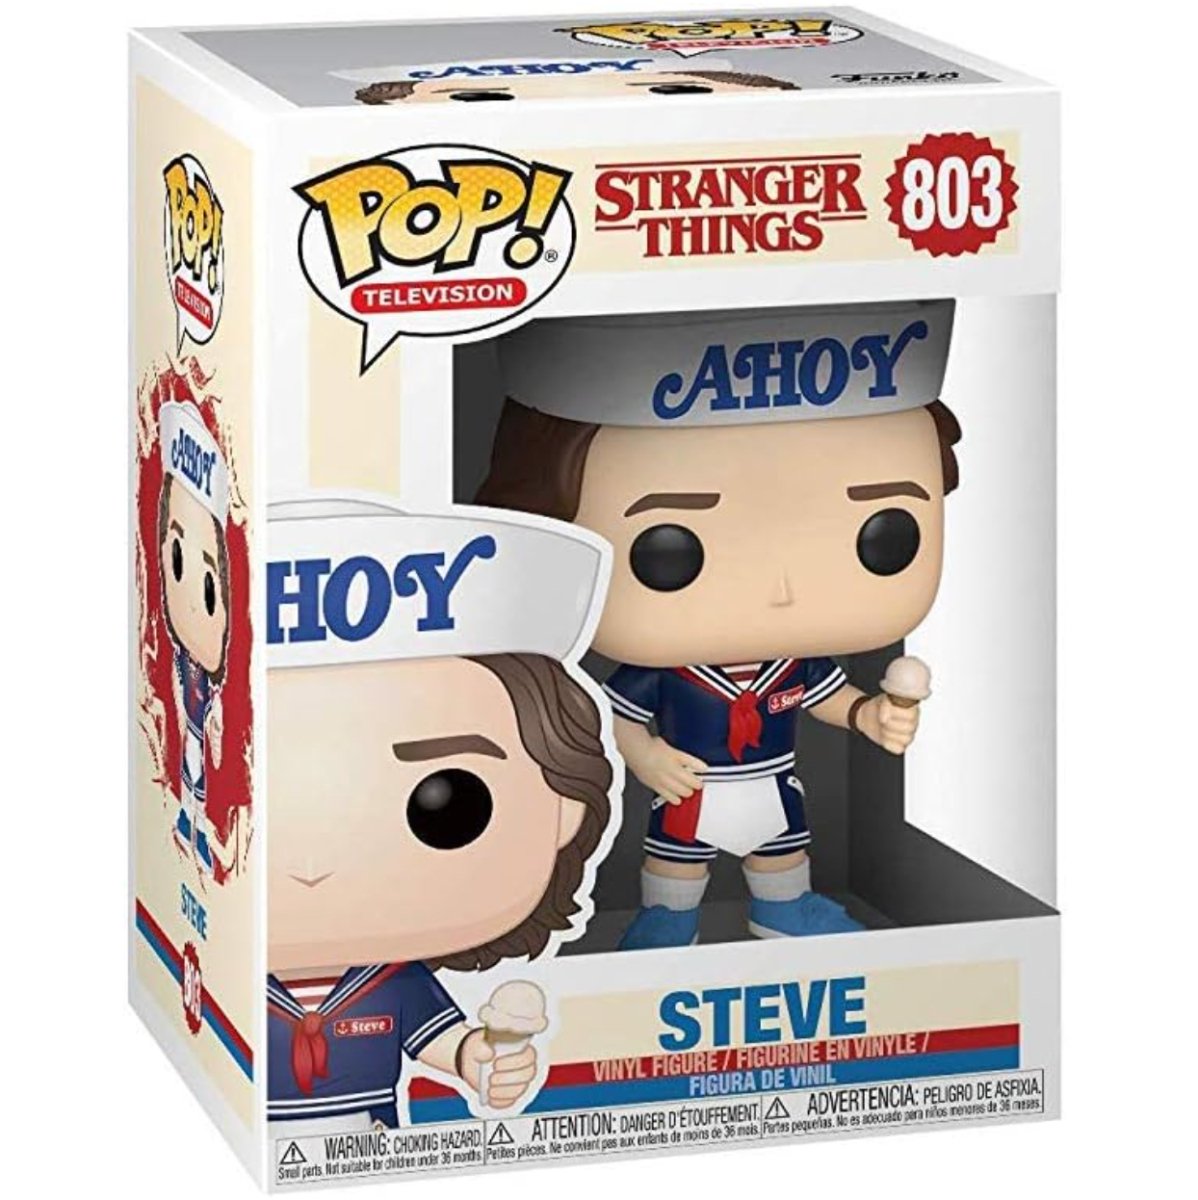 Stranger Things - Steve [with Hat and Ice Cream] #803 - Funko Pop! Vinyl Television - Persona Toys